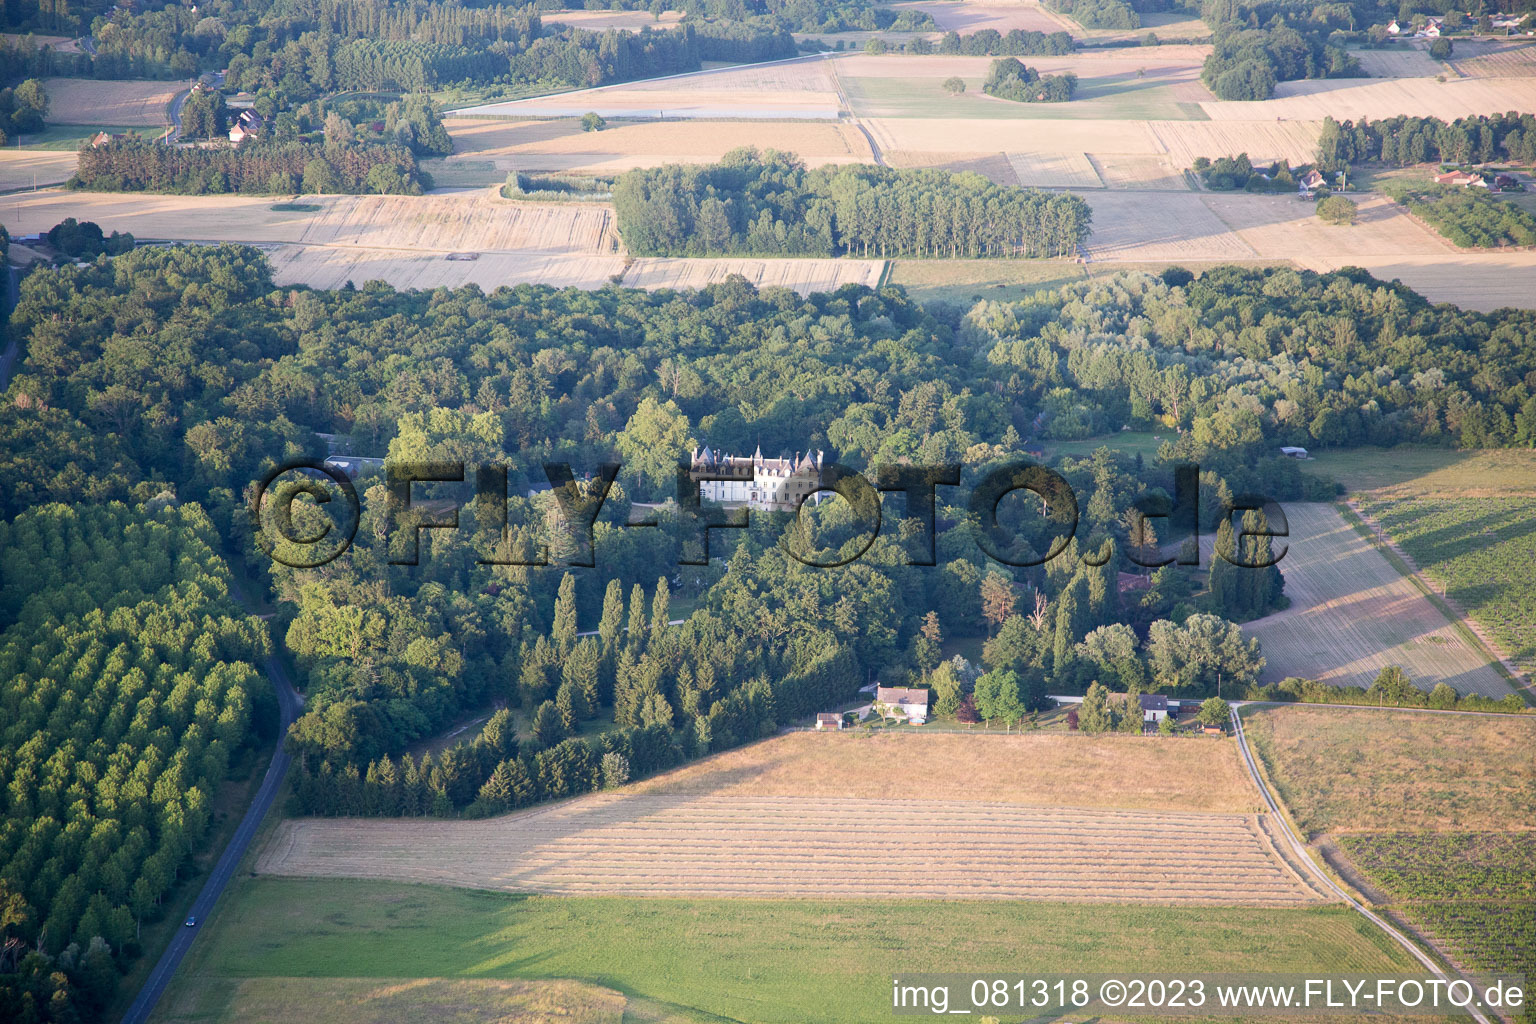 Bird's eye view of Cheverny in the state Loir et Cher, France